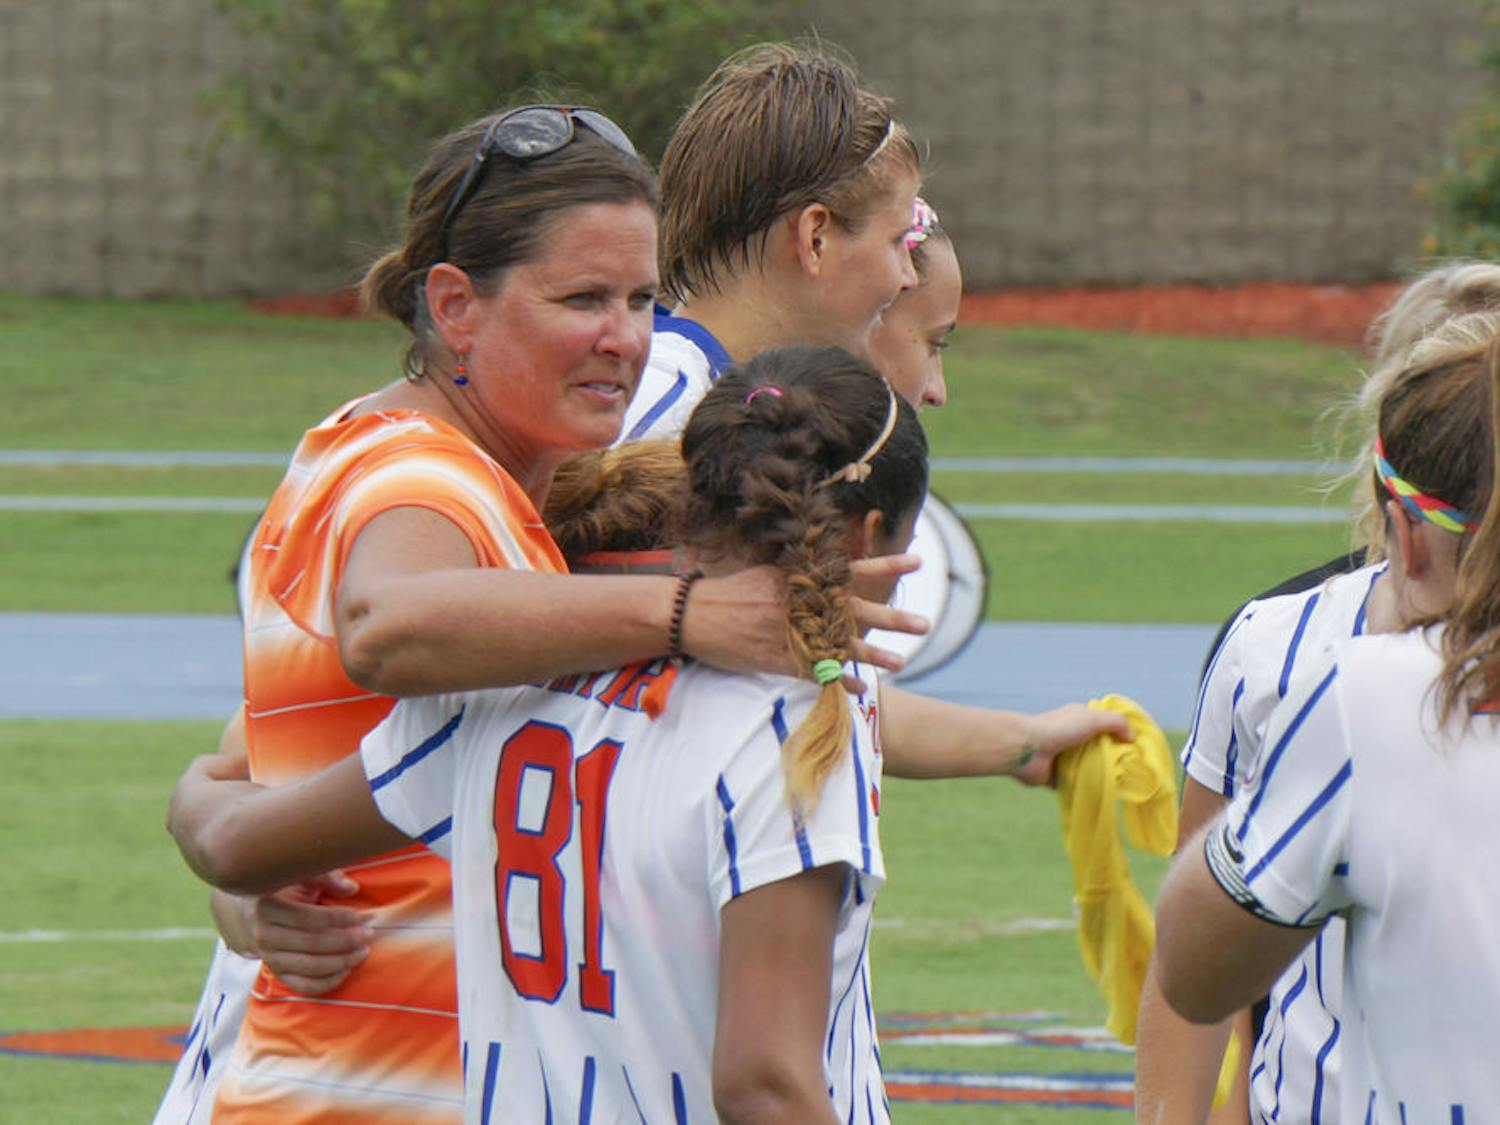 UF soccer coach Becky Burleigh puts her arm around defender Rachelle Smith (81) following Florida's 3-2 win against Florida Sate on Aug. 30, 2015, at James G. Pressly Stadium.